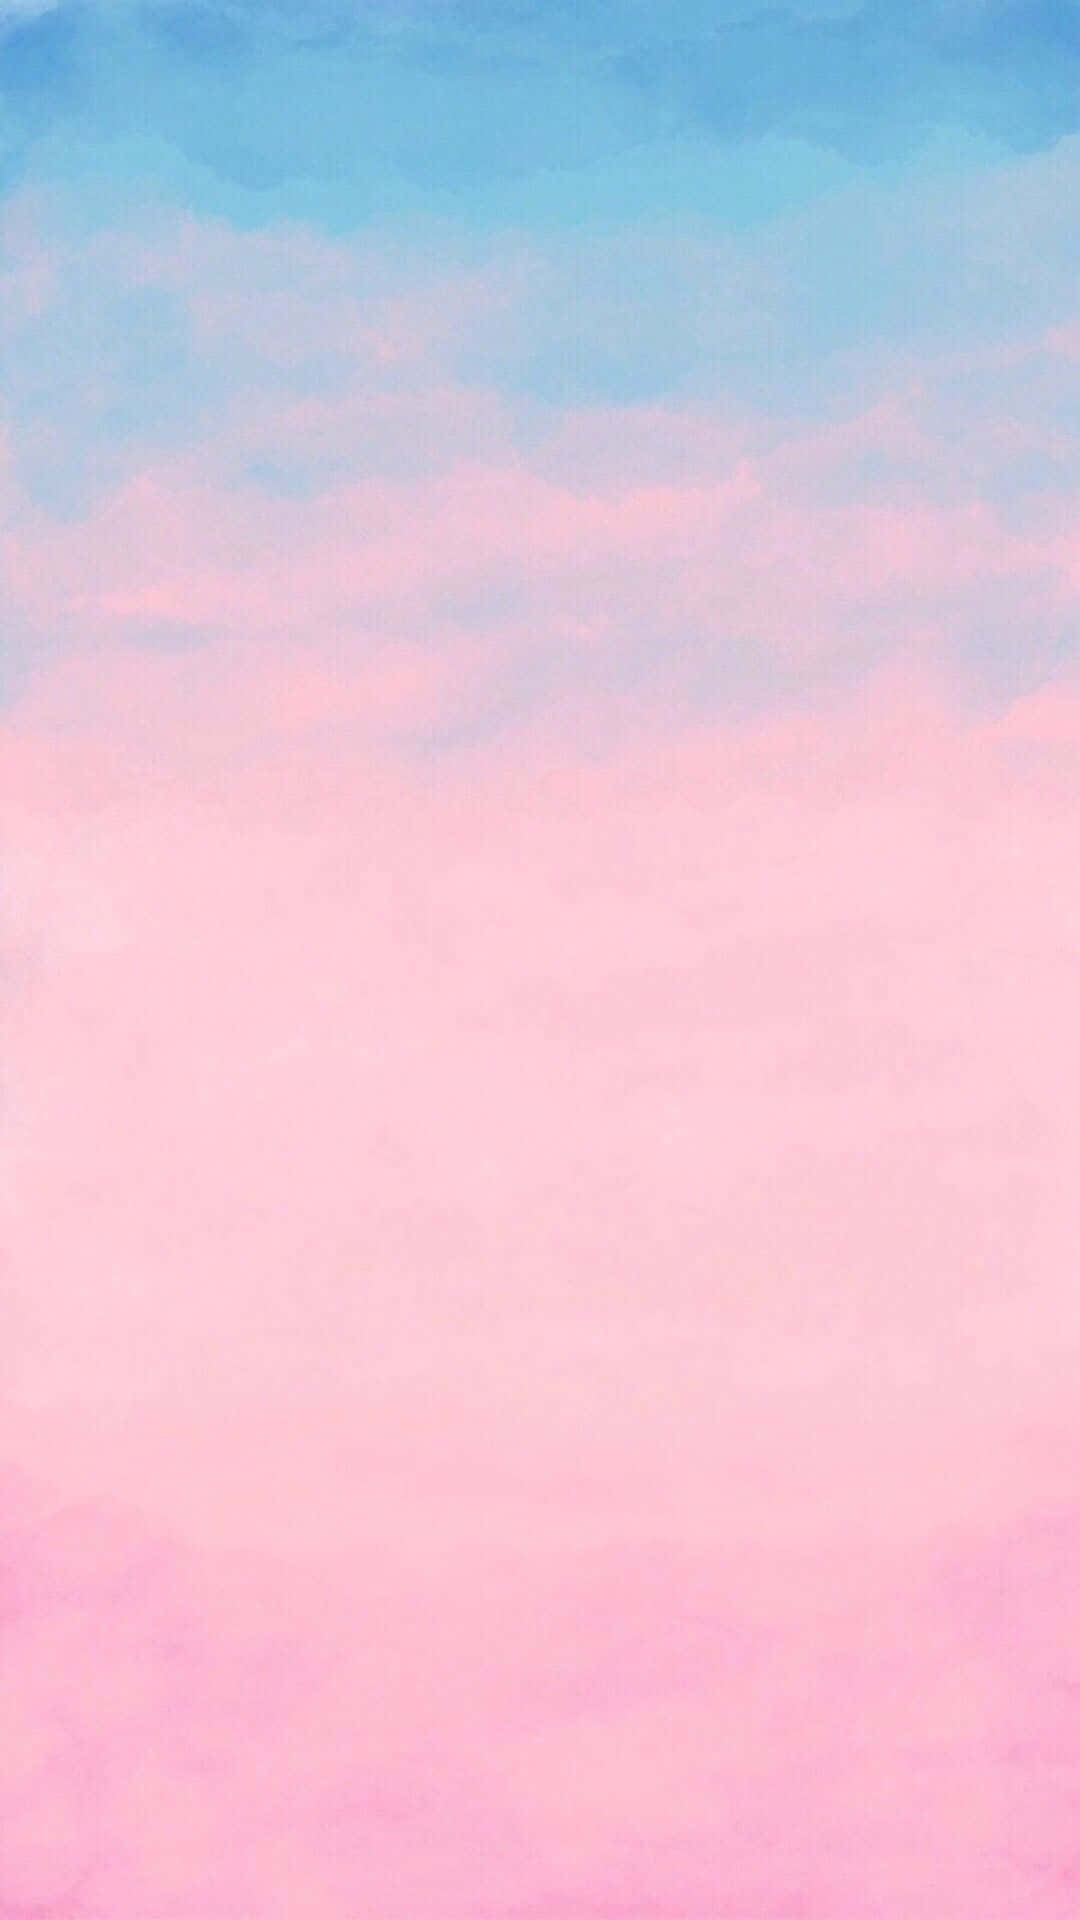 Watercolor Background With Pink And Blue Sky